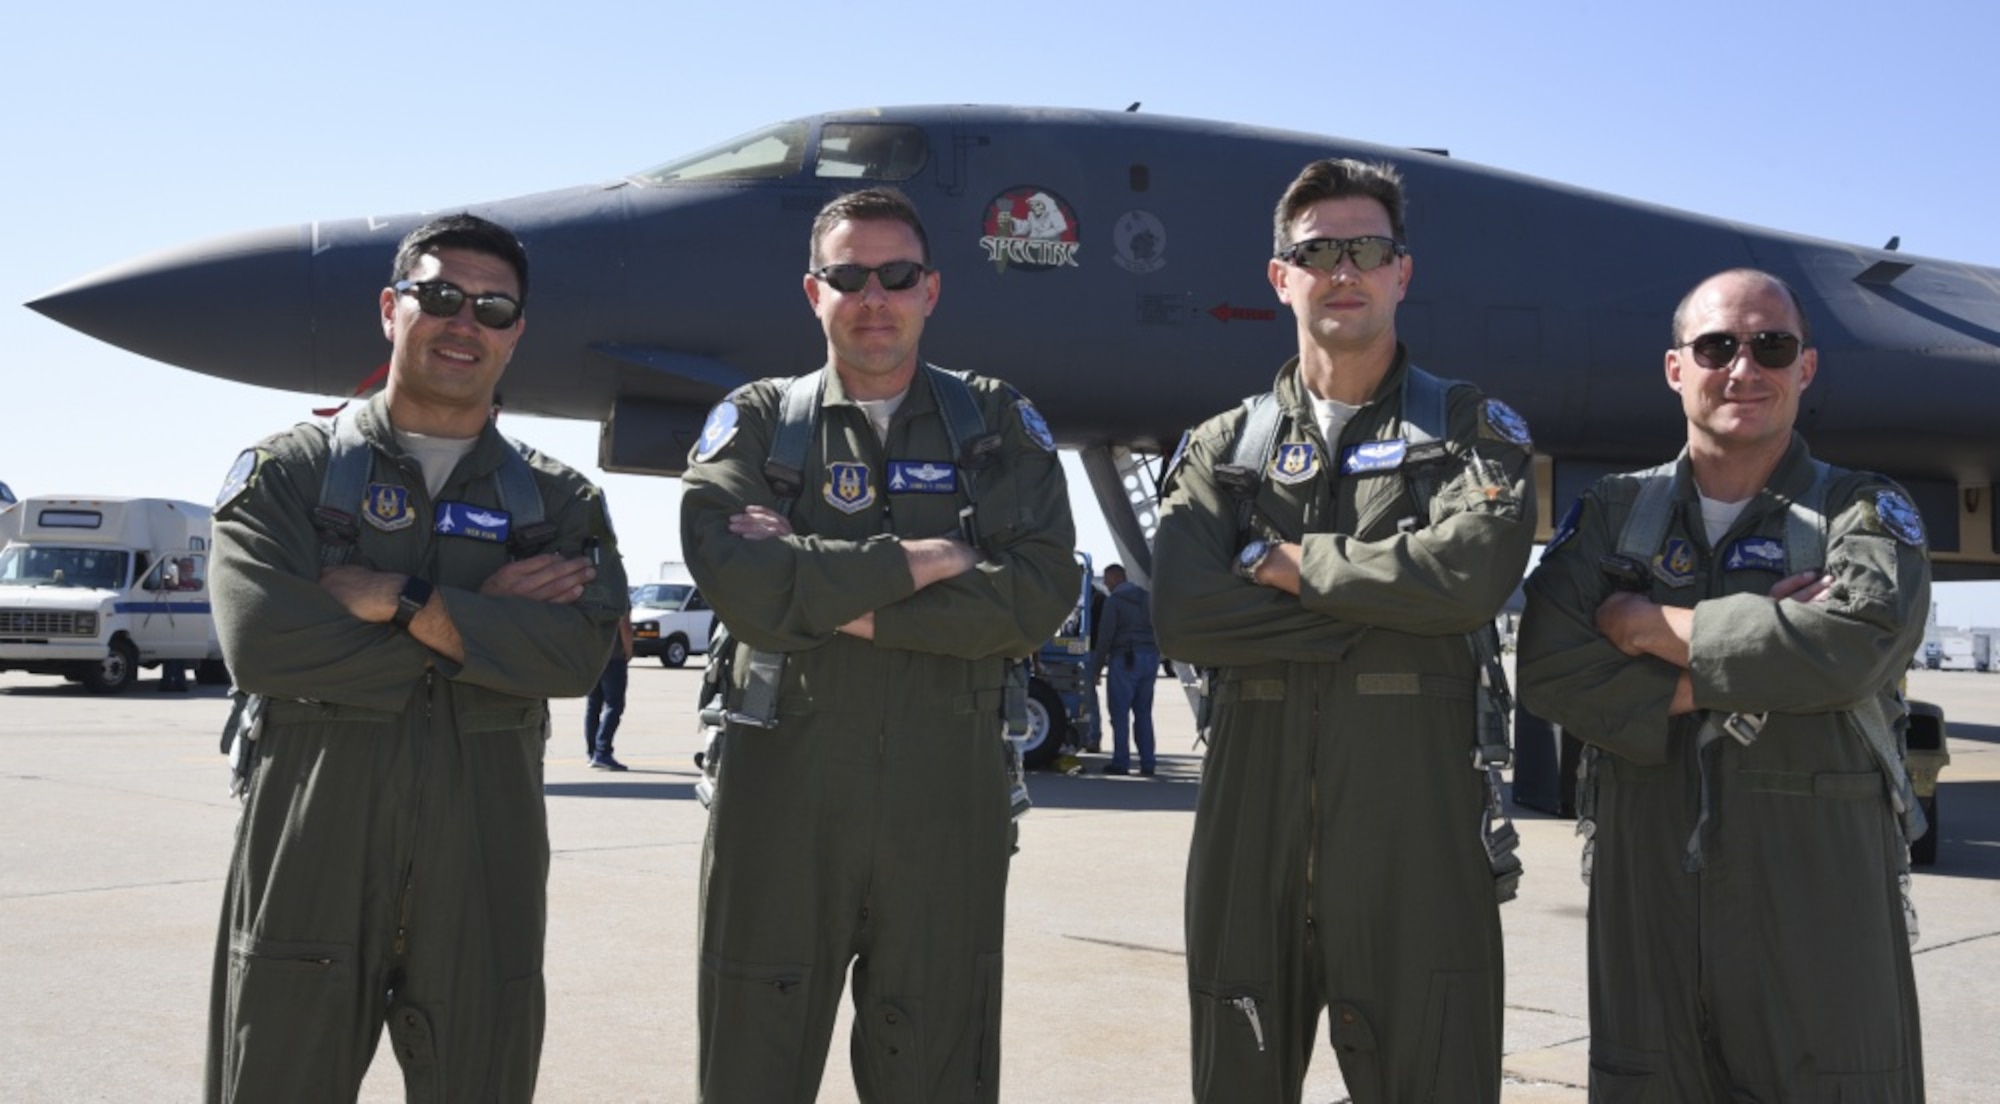 10th Flight Test Squadron flight crew for B-1B Lancer, 86-0109, pose for a group photo after ferrying the aircraft from Midland International Air & Space Port to Tinker Air Force Base, Oklahoma, on Oct. 26, 2018. Shown are: Maj. Ivan Vian; pilot and aircraft commander, Lt. Col. James Couch; Offensive Weapons System Officer, Maj. Michael Griffin; copilot and Lt. Col. Matthew Grimes; Defensive Weapons System Officer. The damaged B-1B will undergo depot-level maintenance and upgrades with the Oklahoma City Air Logistics Complex Oct. 26, 2018. During a routine training flight May 1, the Dyess AFB based B-1B had an in-flight emergency resulting in an attempted ejection. The first crewmembers seat failed to deploy and the aircraft commander halted the ejection sequence and heroically saved the aircraft and crew by landing at Midland International Air & Space Port.